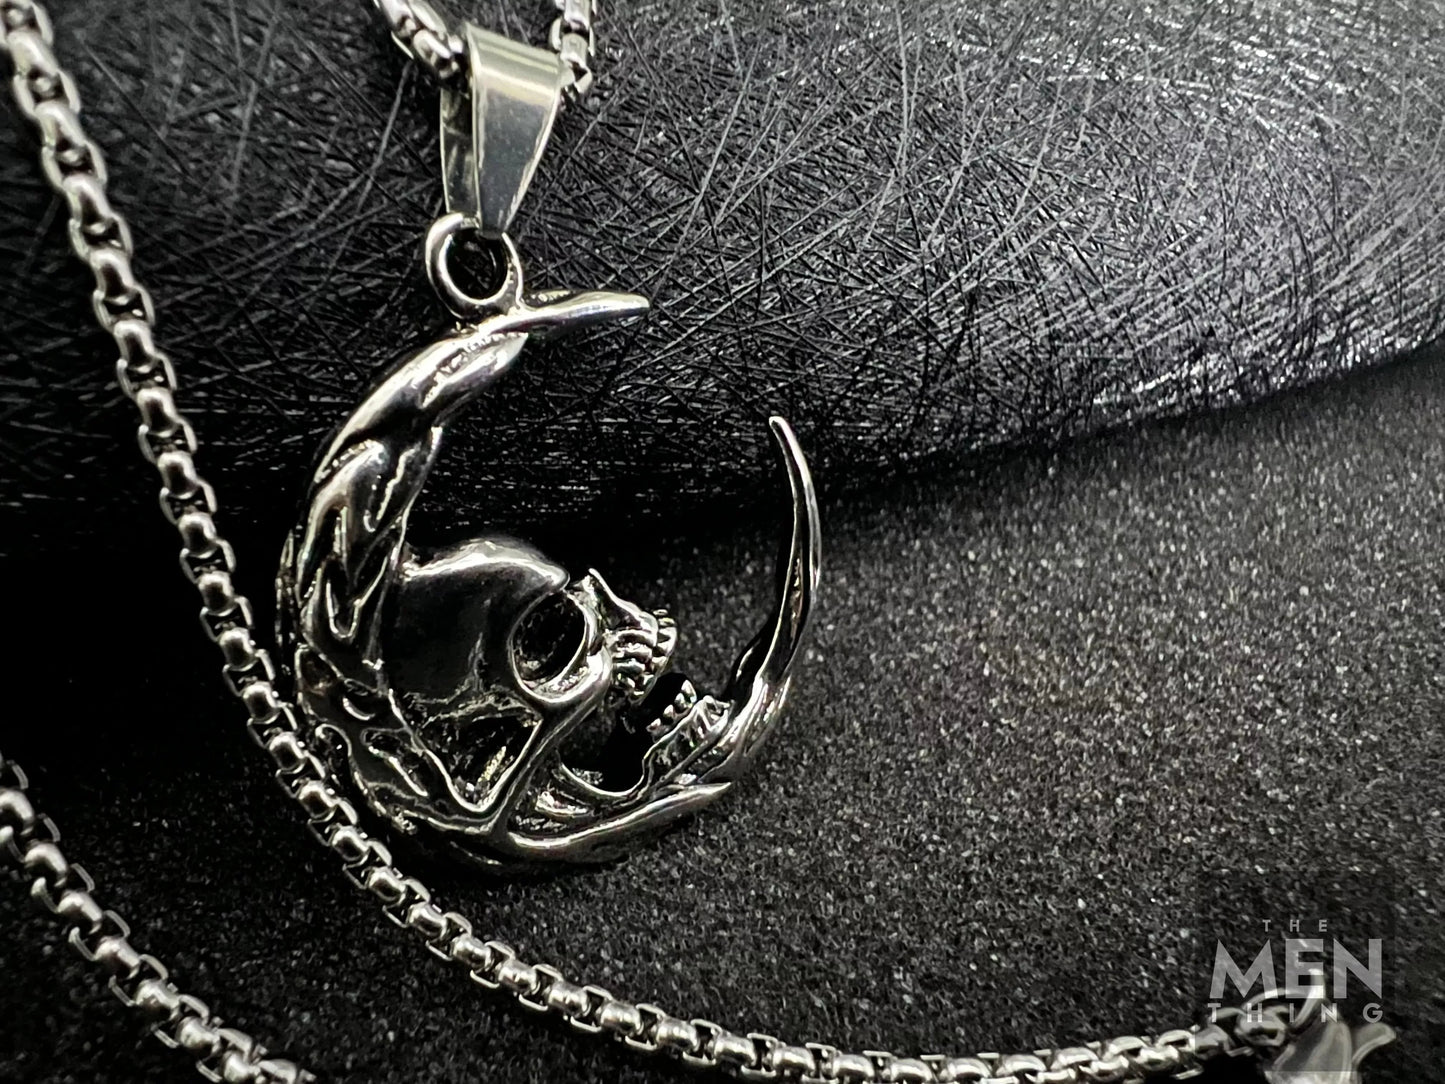 THE MEN THING Alloy Moon Skull Pendant with Pure Stainless Steel 24inch Chain for Men, European trending Style - Round Box Chain & Pendant for Men & Boy